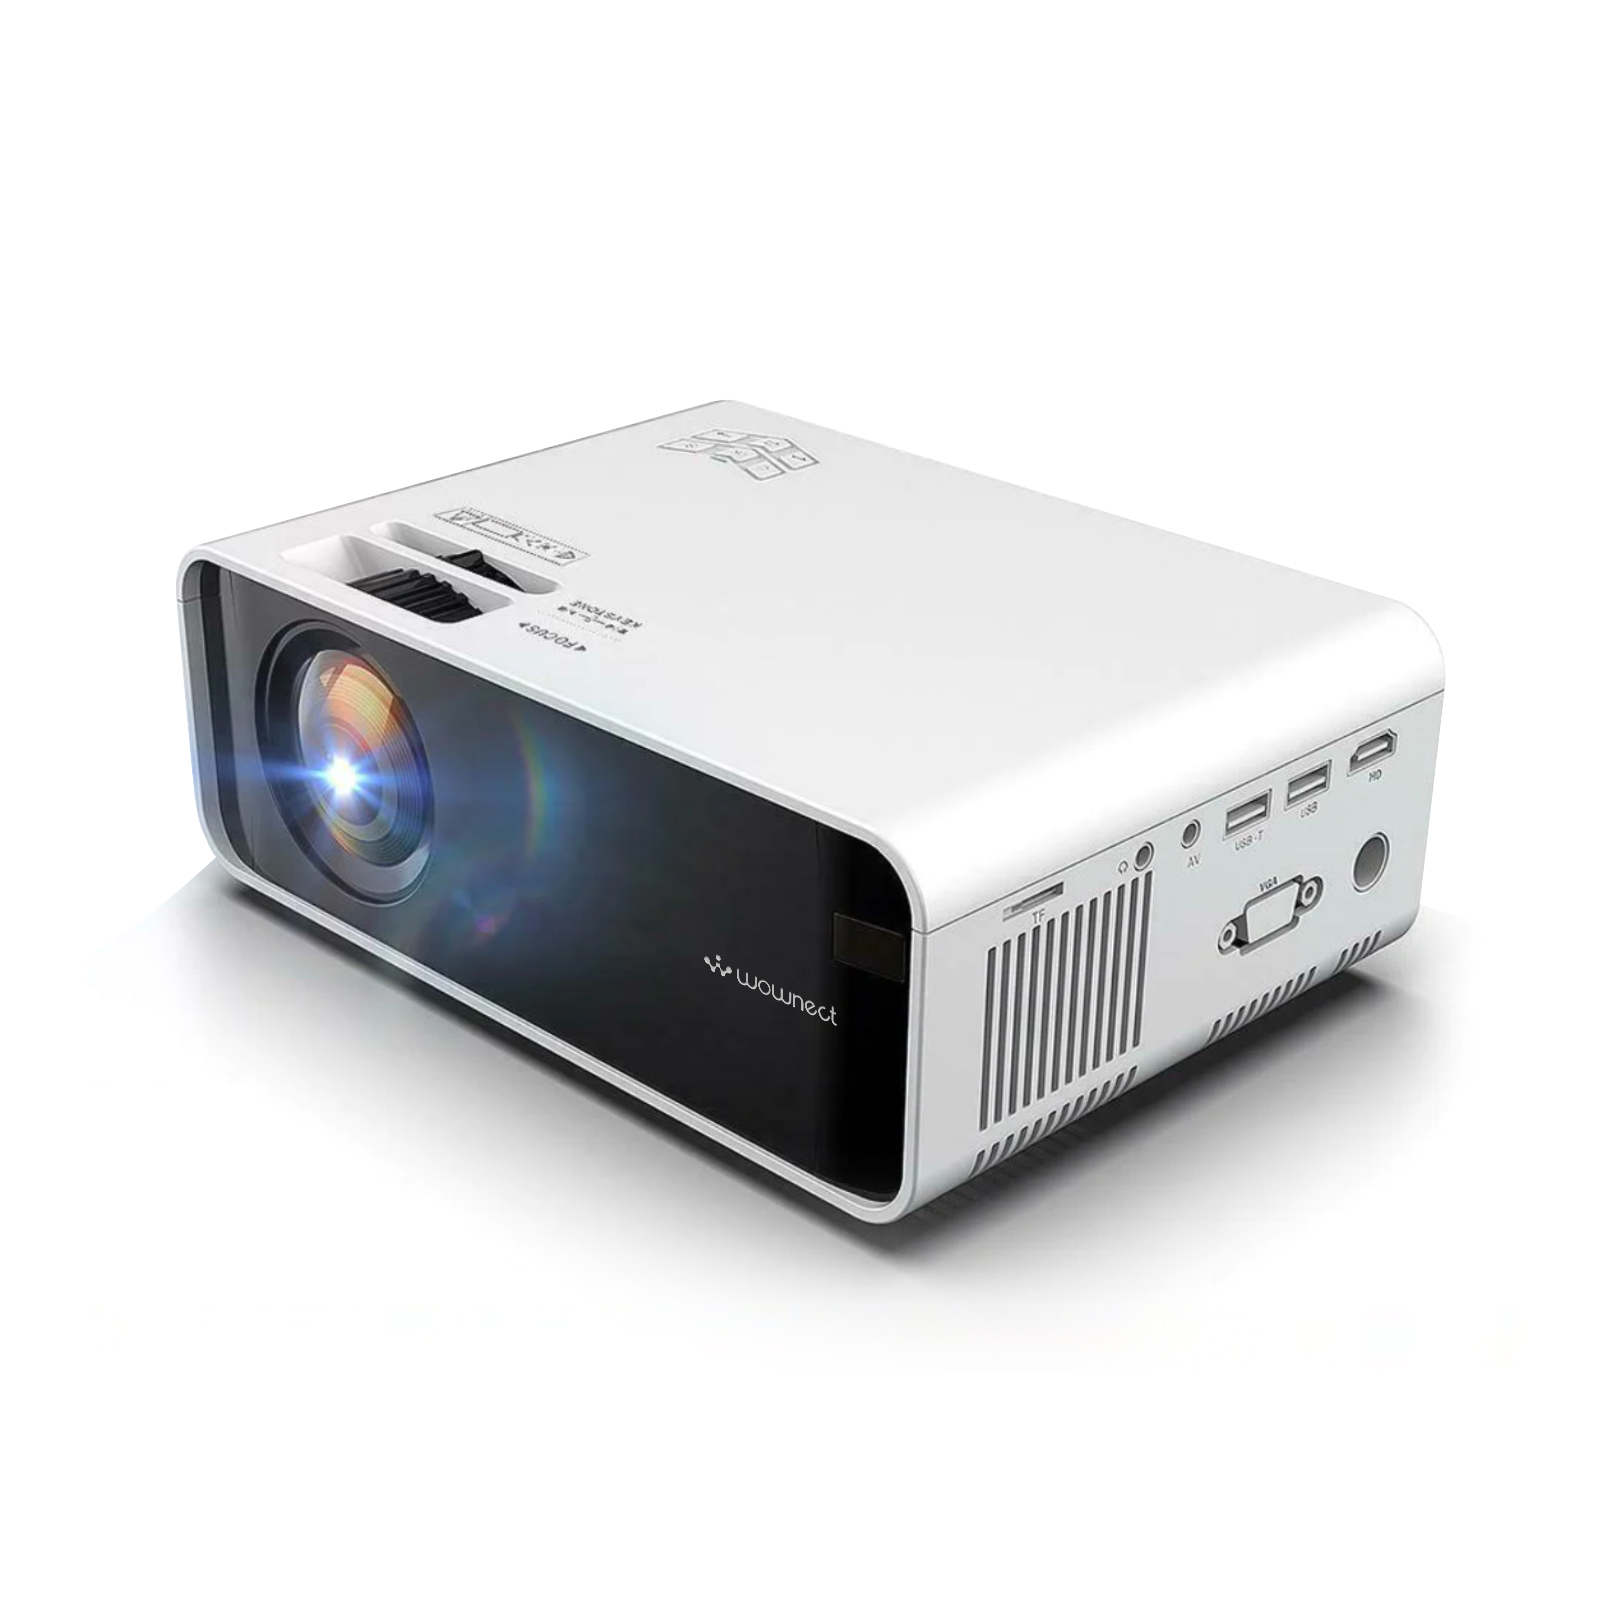 Wownect wp01 | mini projector 3300 lumens native res 1280x720p supports 1080p video projector